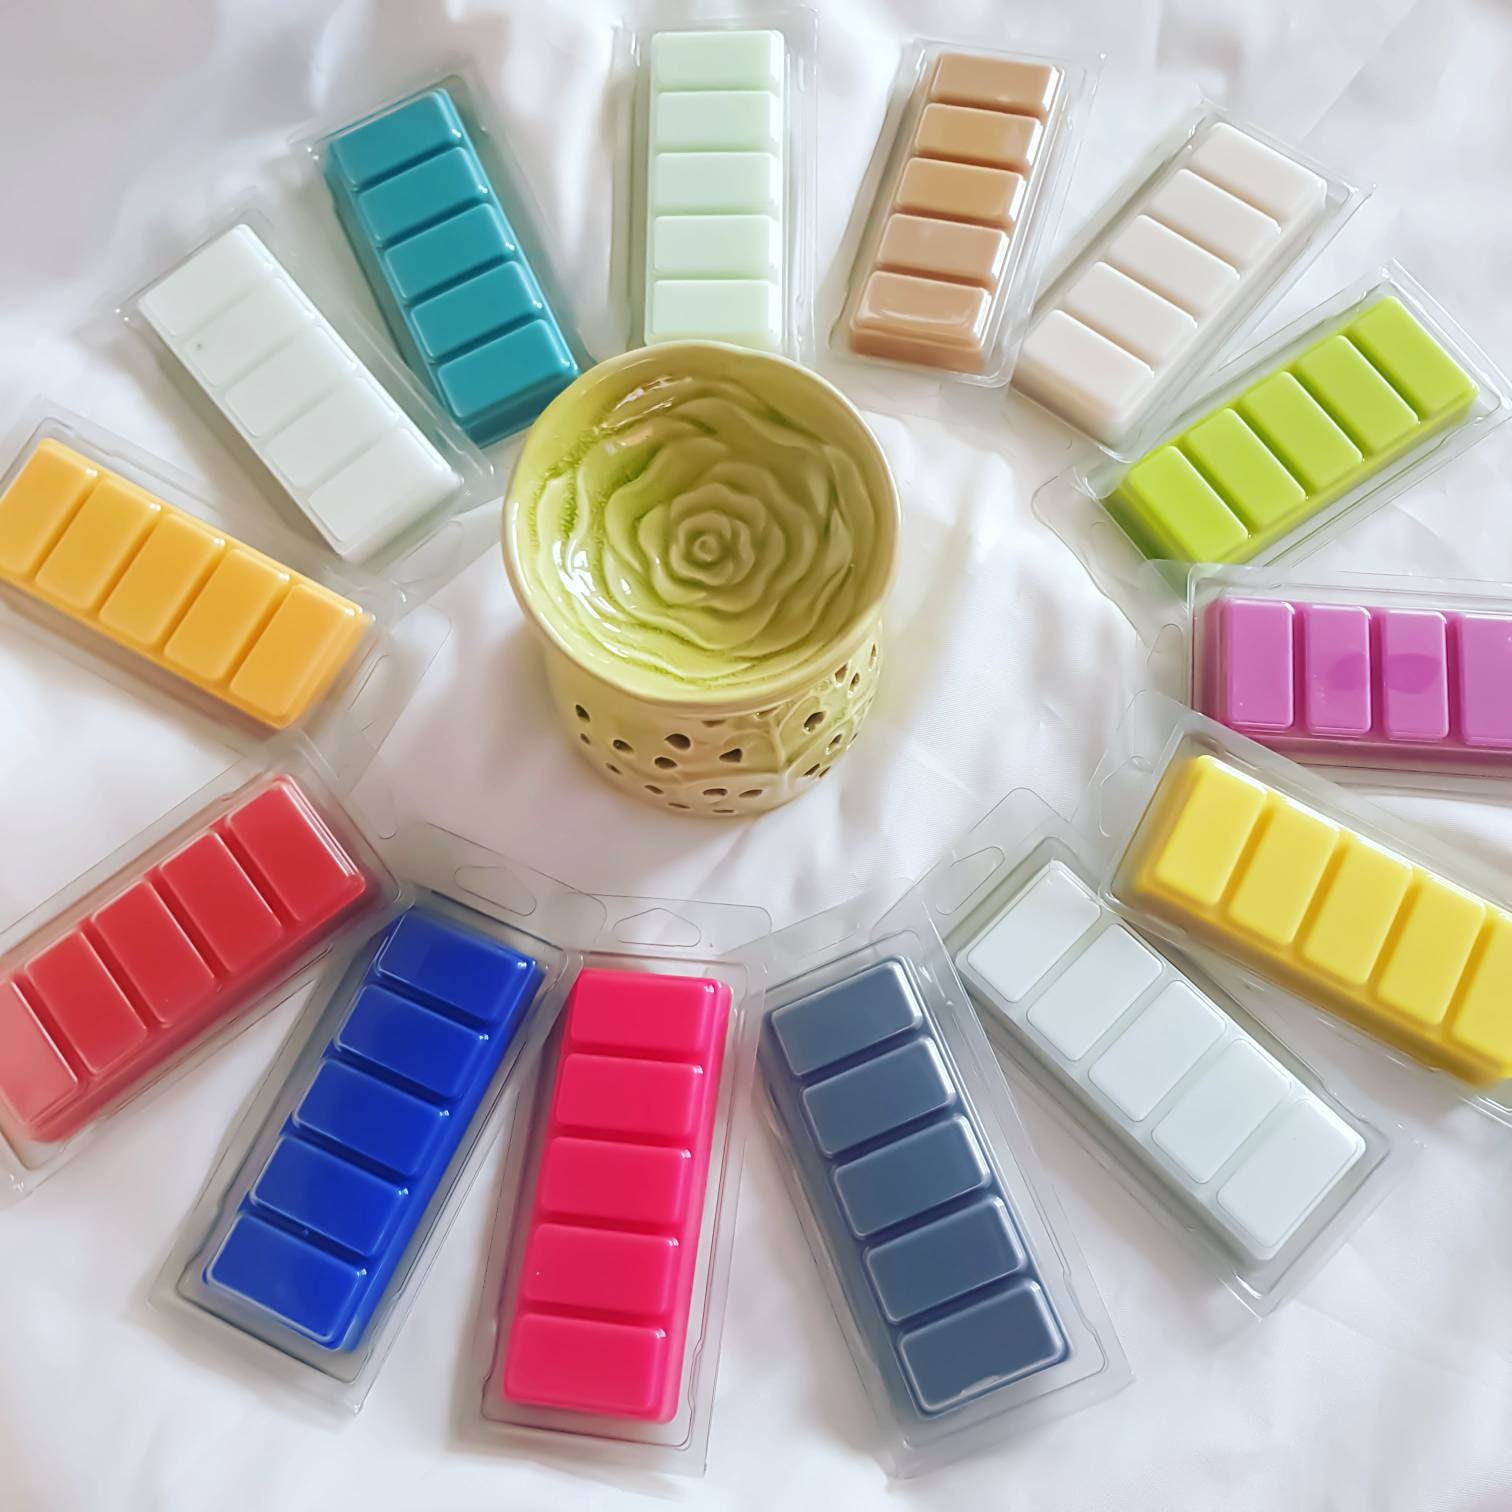 Snap-Bar Silicone Mould Wax Melts Candles Soaps Resin Tarts Silicone Mold 4  bars